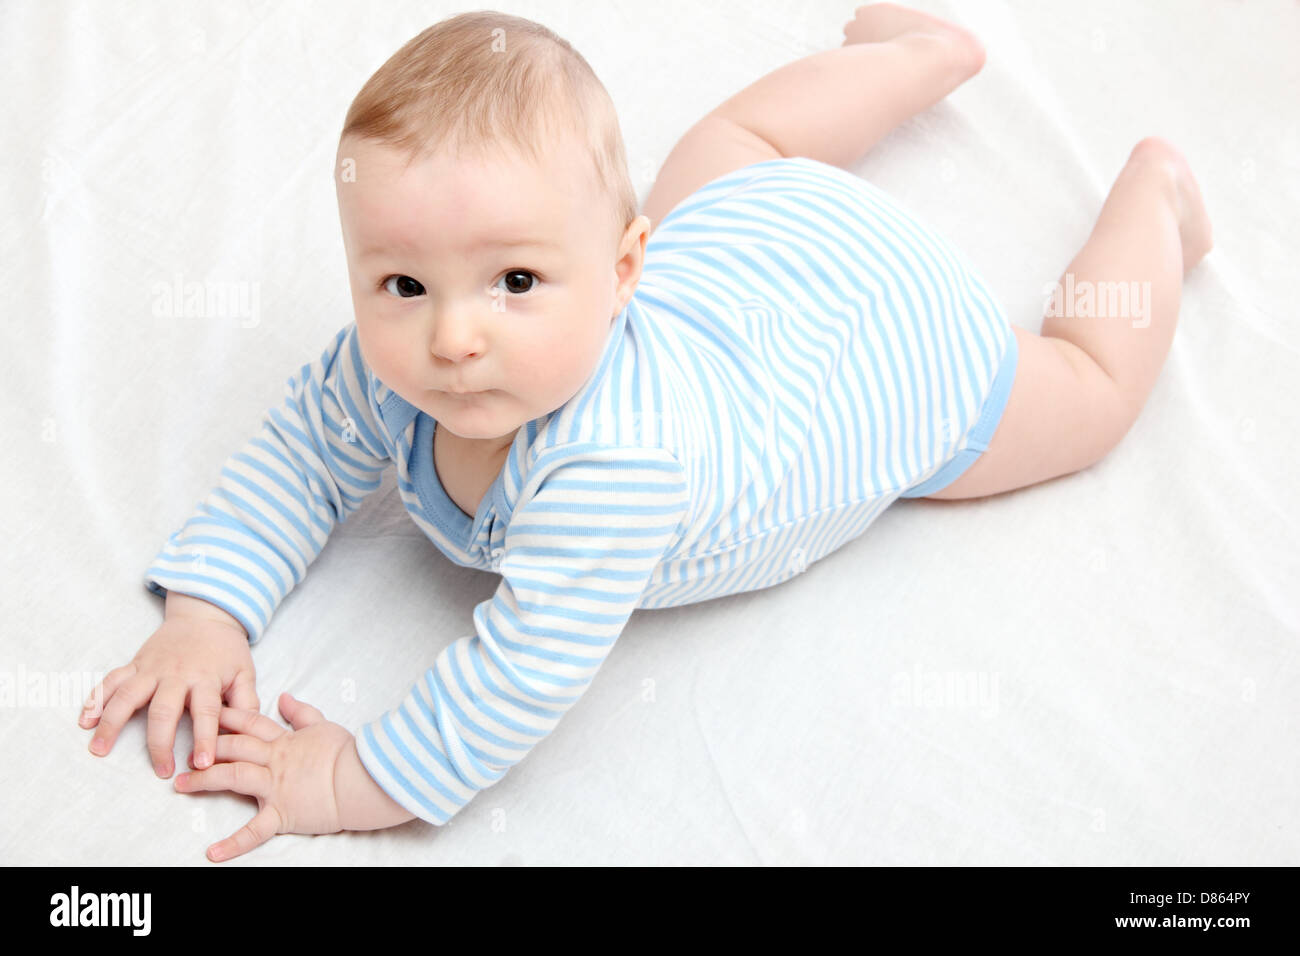 Baby boy lies on bed Stock Photo